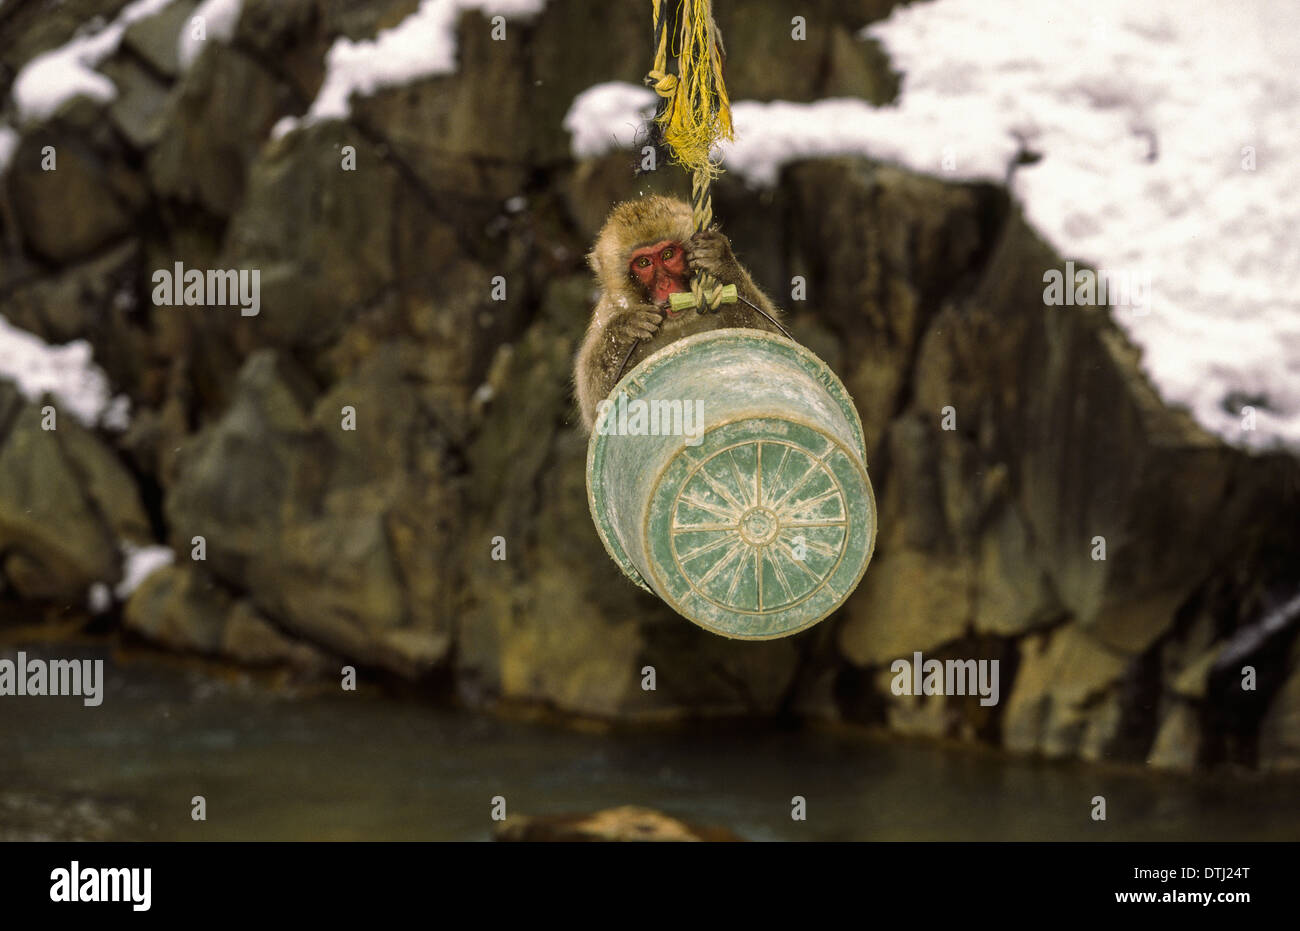 YOUNG JAPANESE MACAQUE OR SNOW MONKEY (Macaca fuscata) PLAYING IN A BUCKET SUSPENDED OVER A RIVER Stock Photo